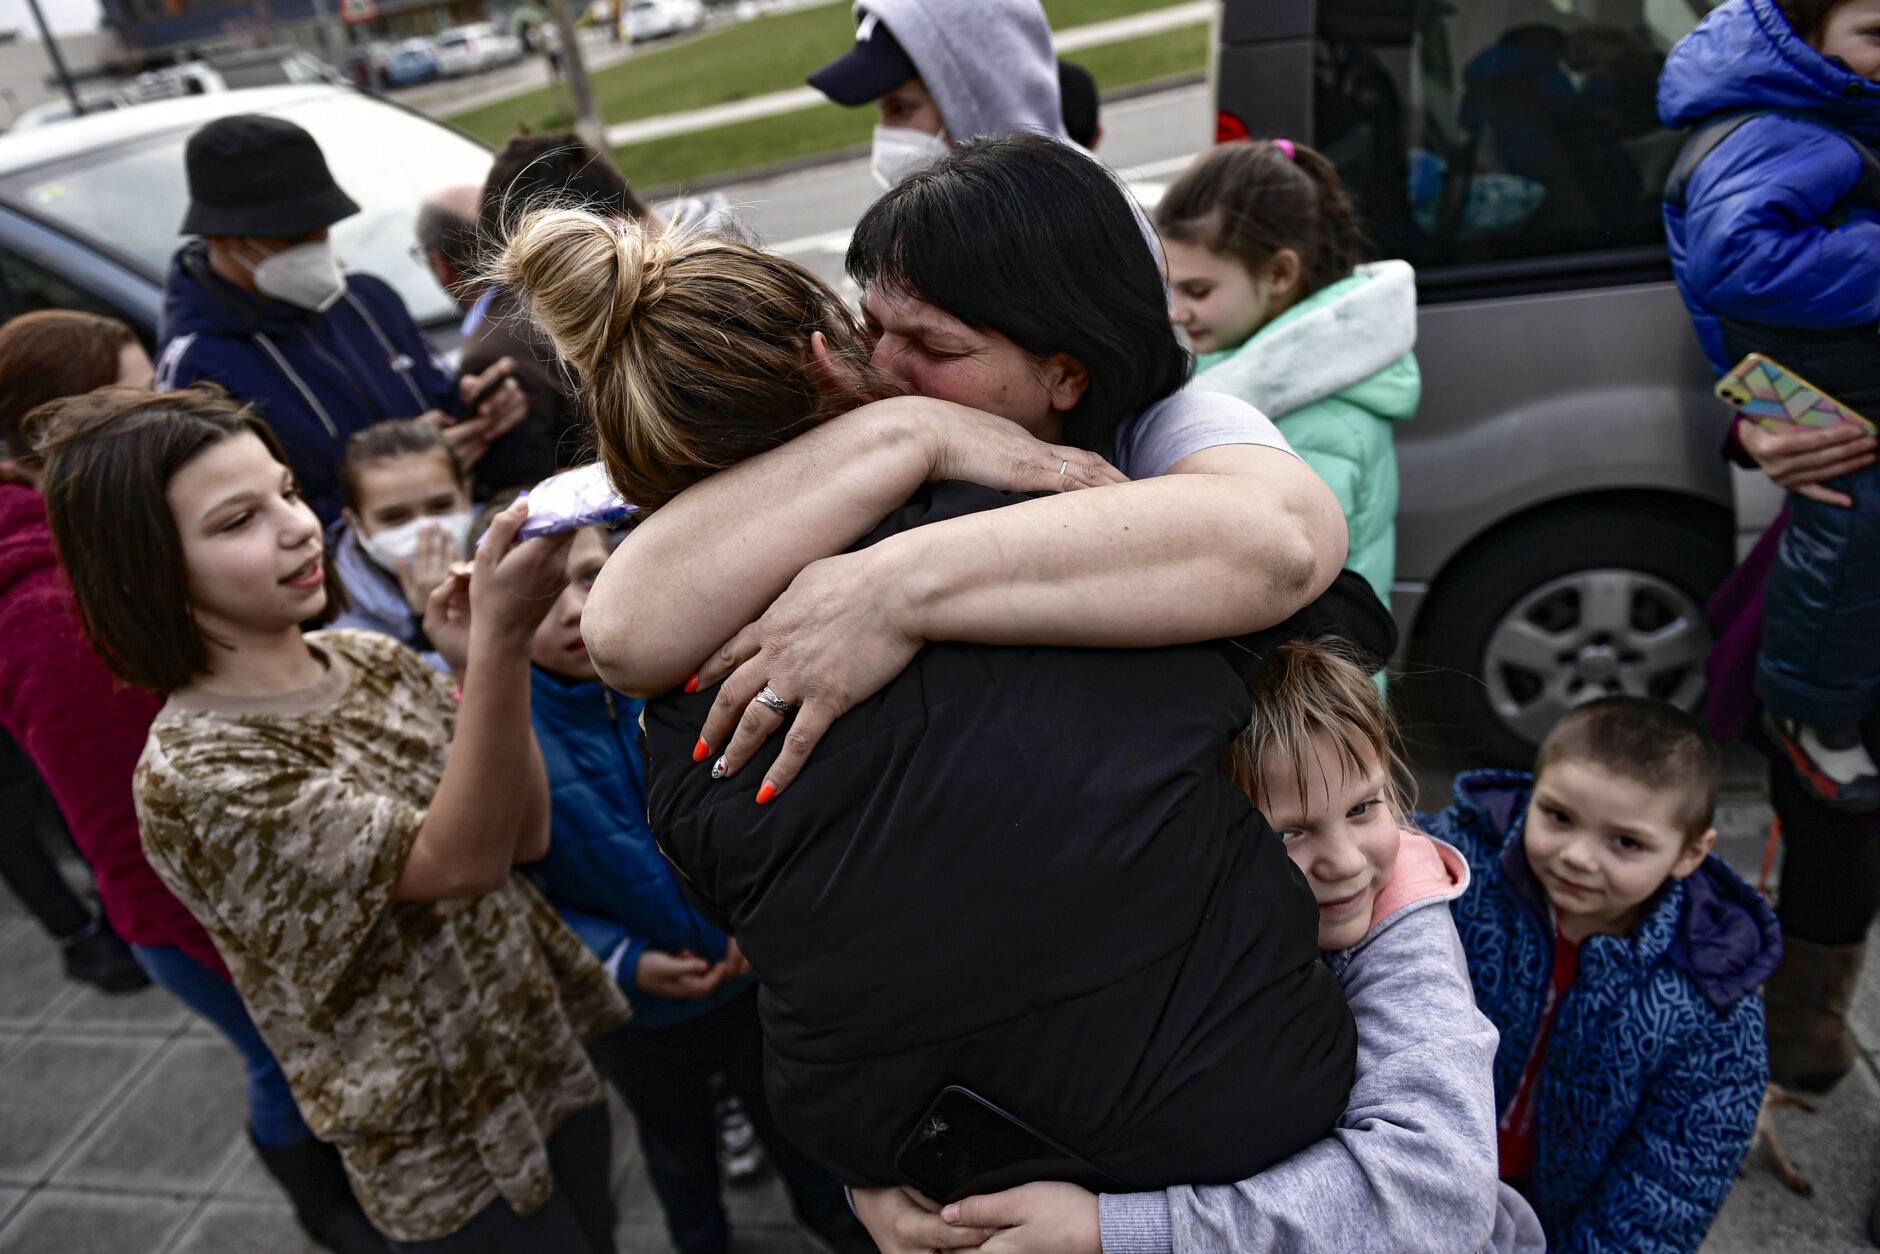 <p>Ukrainian Irina Oscaria, 21 years, resident in Spain, hugs her mother Zhana Onishchenko after they arrived in Cizur Menor, northern Spain, Tuesday, March 15, 2022, after Russian&#8217;s invasion of Ukraine. Oscaria&#8217;s family traveled more than five thousands kilometers to arrive in Spain.</p>
